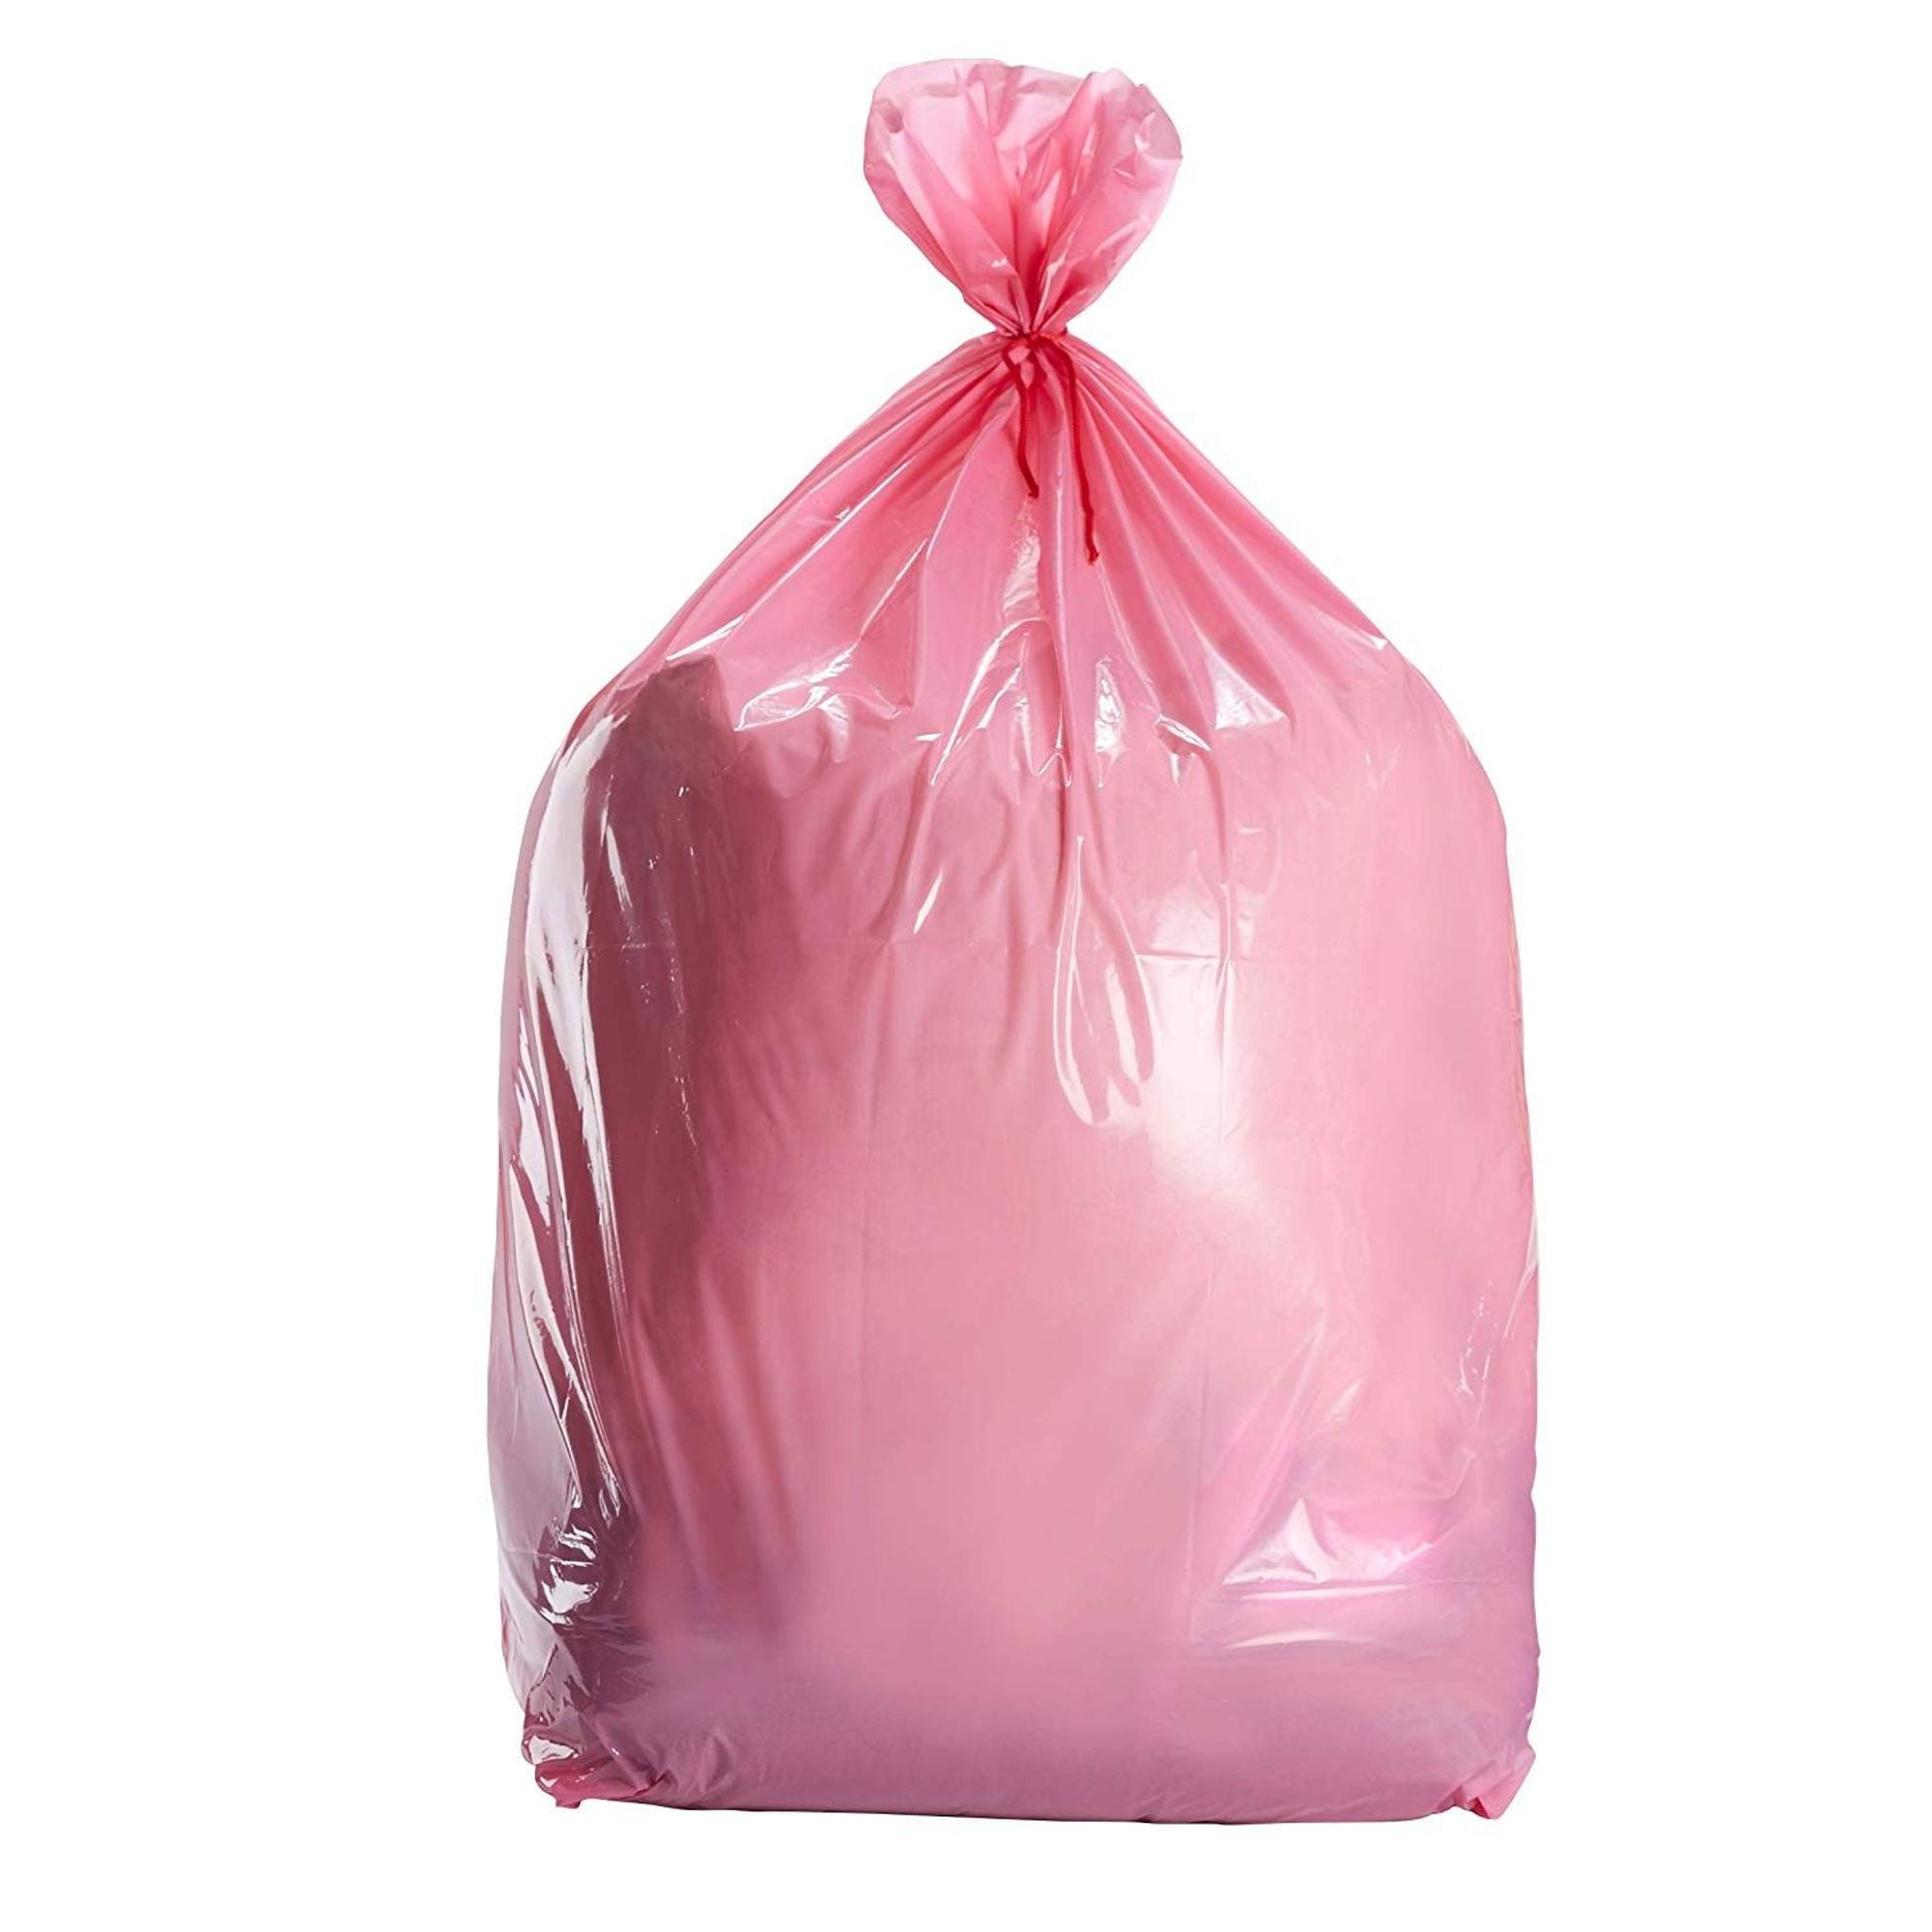 Large Clear Plastic Bags For Gifts | IUCN Water